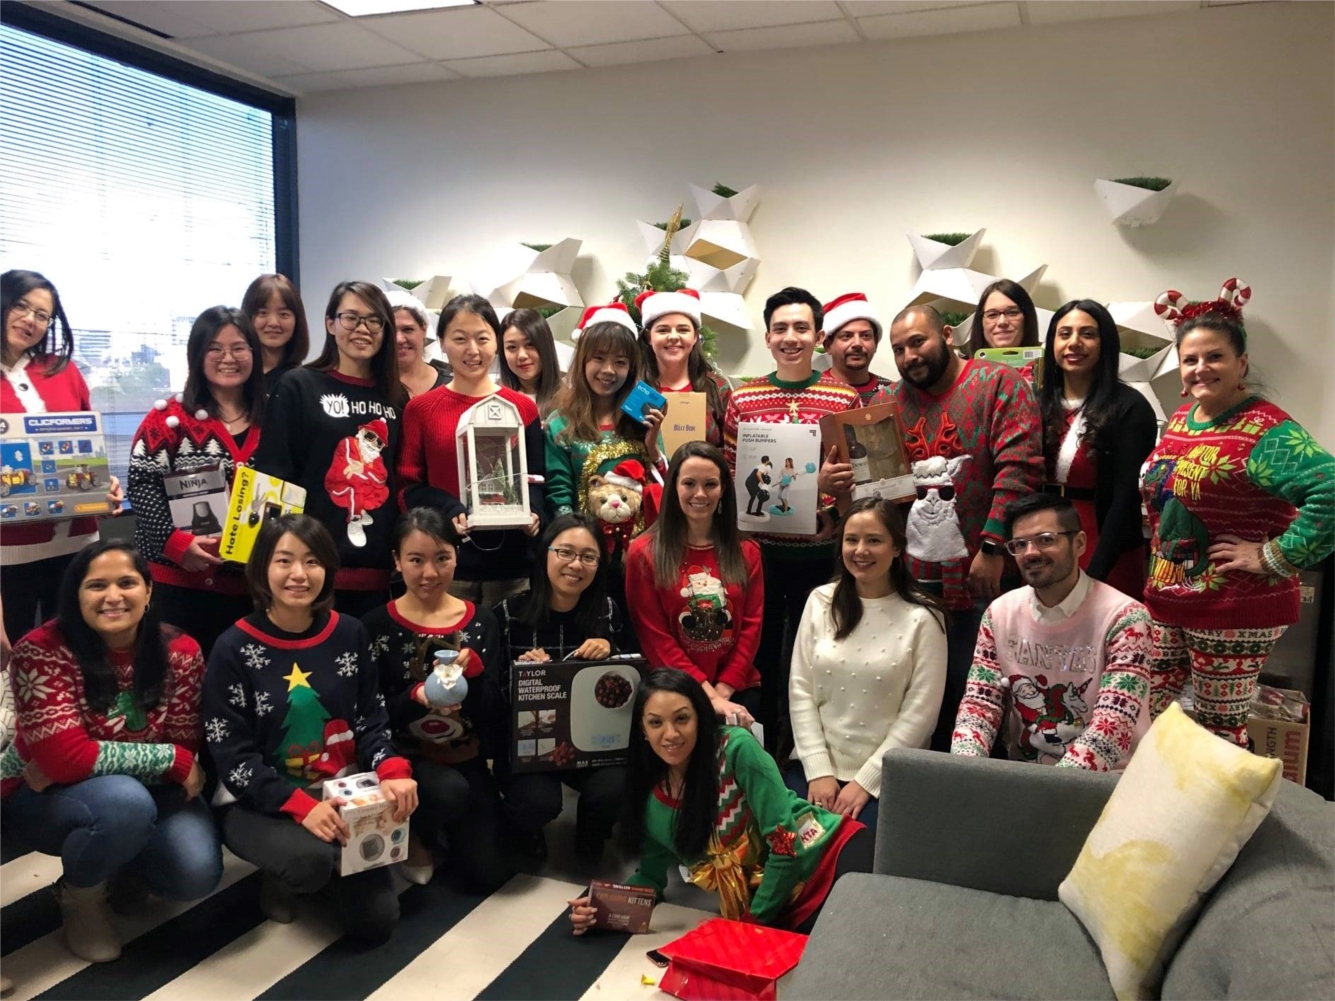 Annual ugly sweater and white elephant holiday gift exchange.